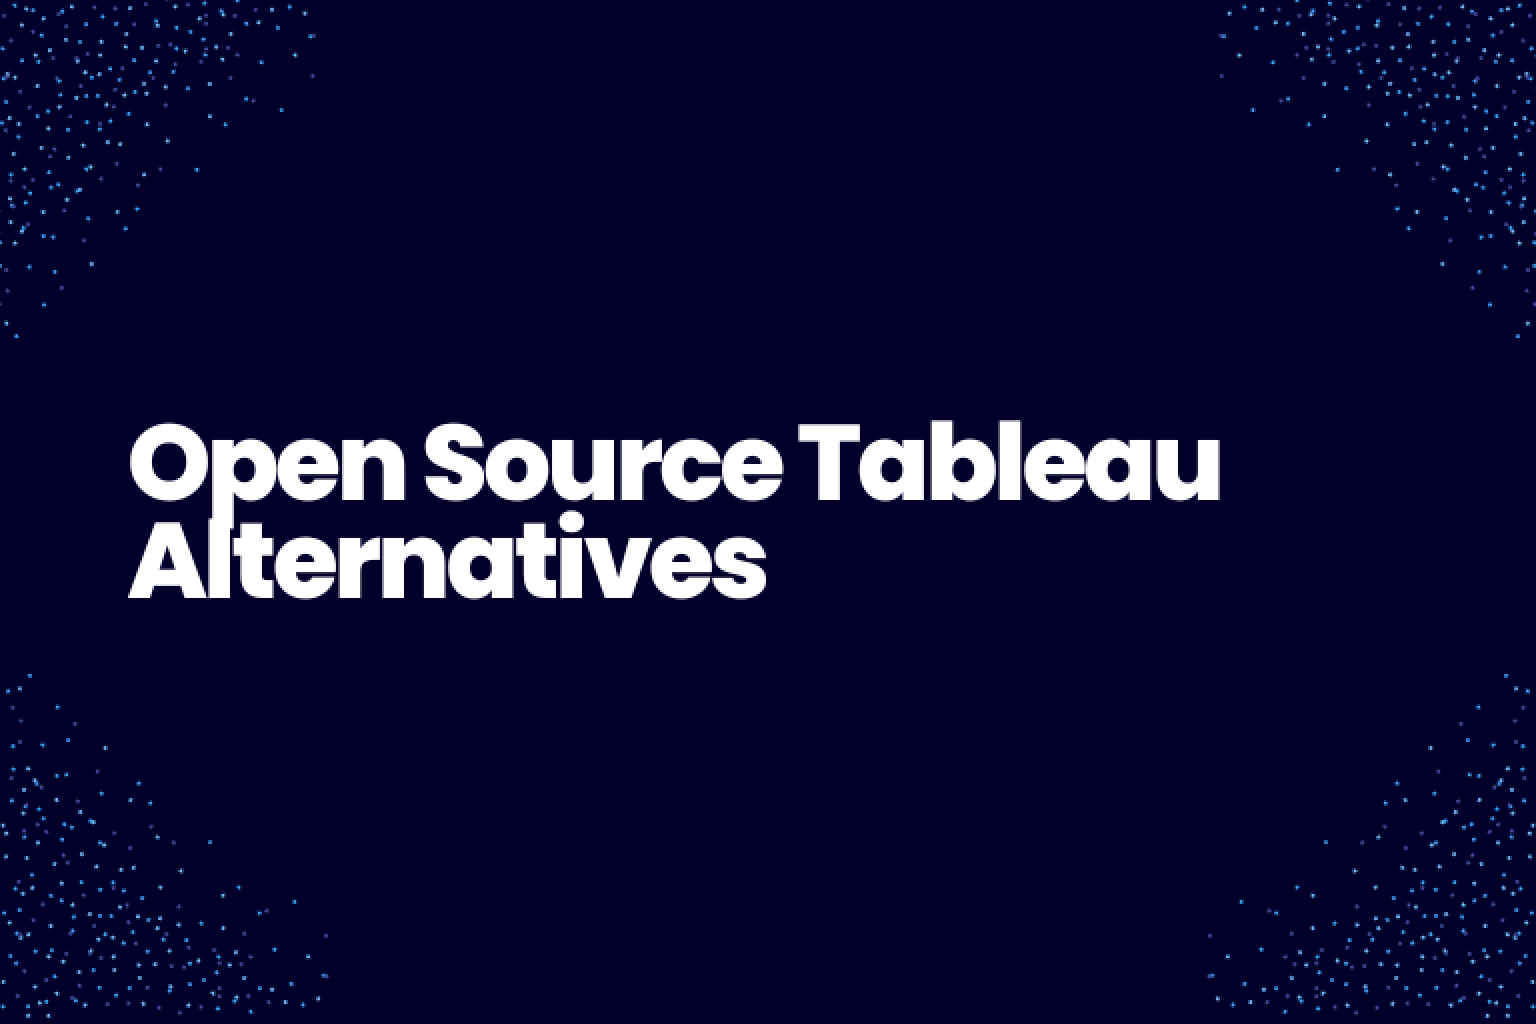 Explore the best open source alternatives to Tableau for data visualization and analytics. Compare features, strengths, and weaknesses to make the right choice for your business.